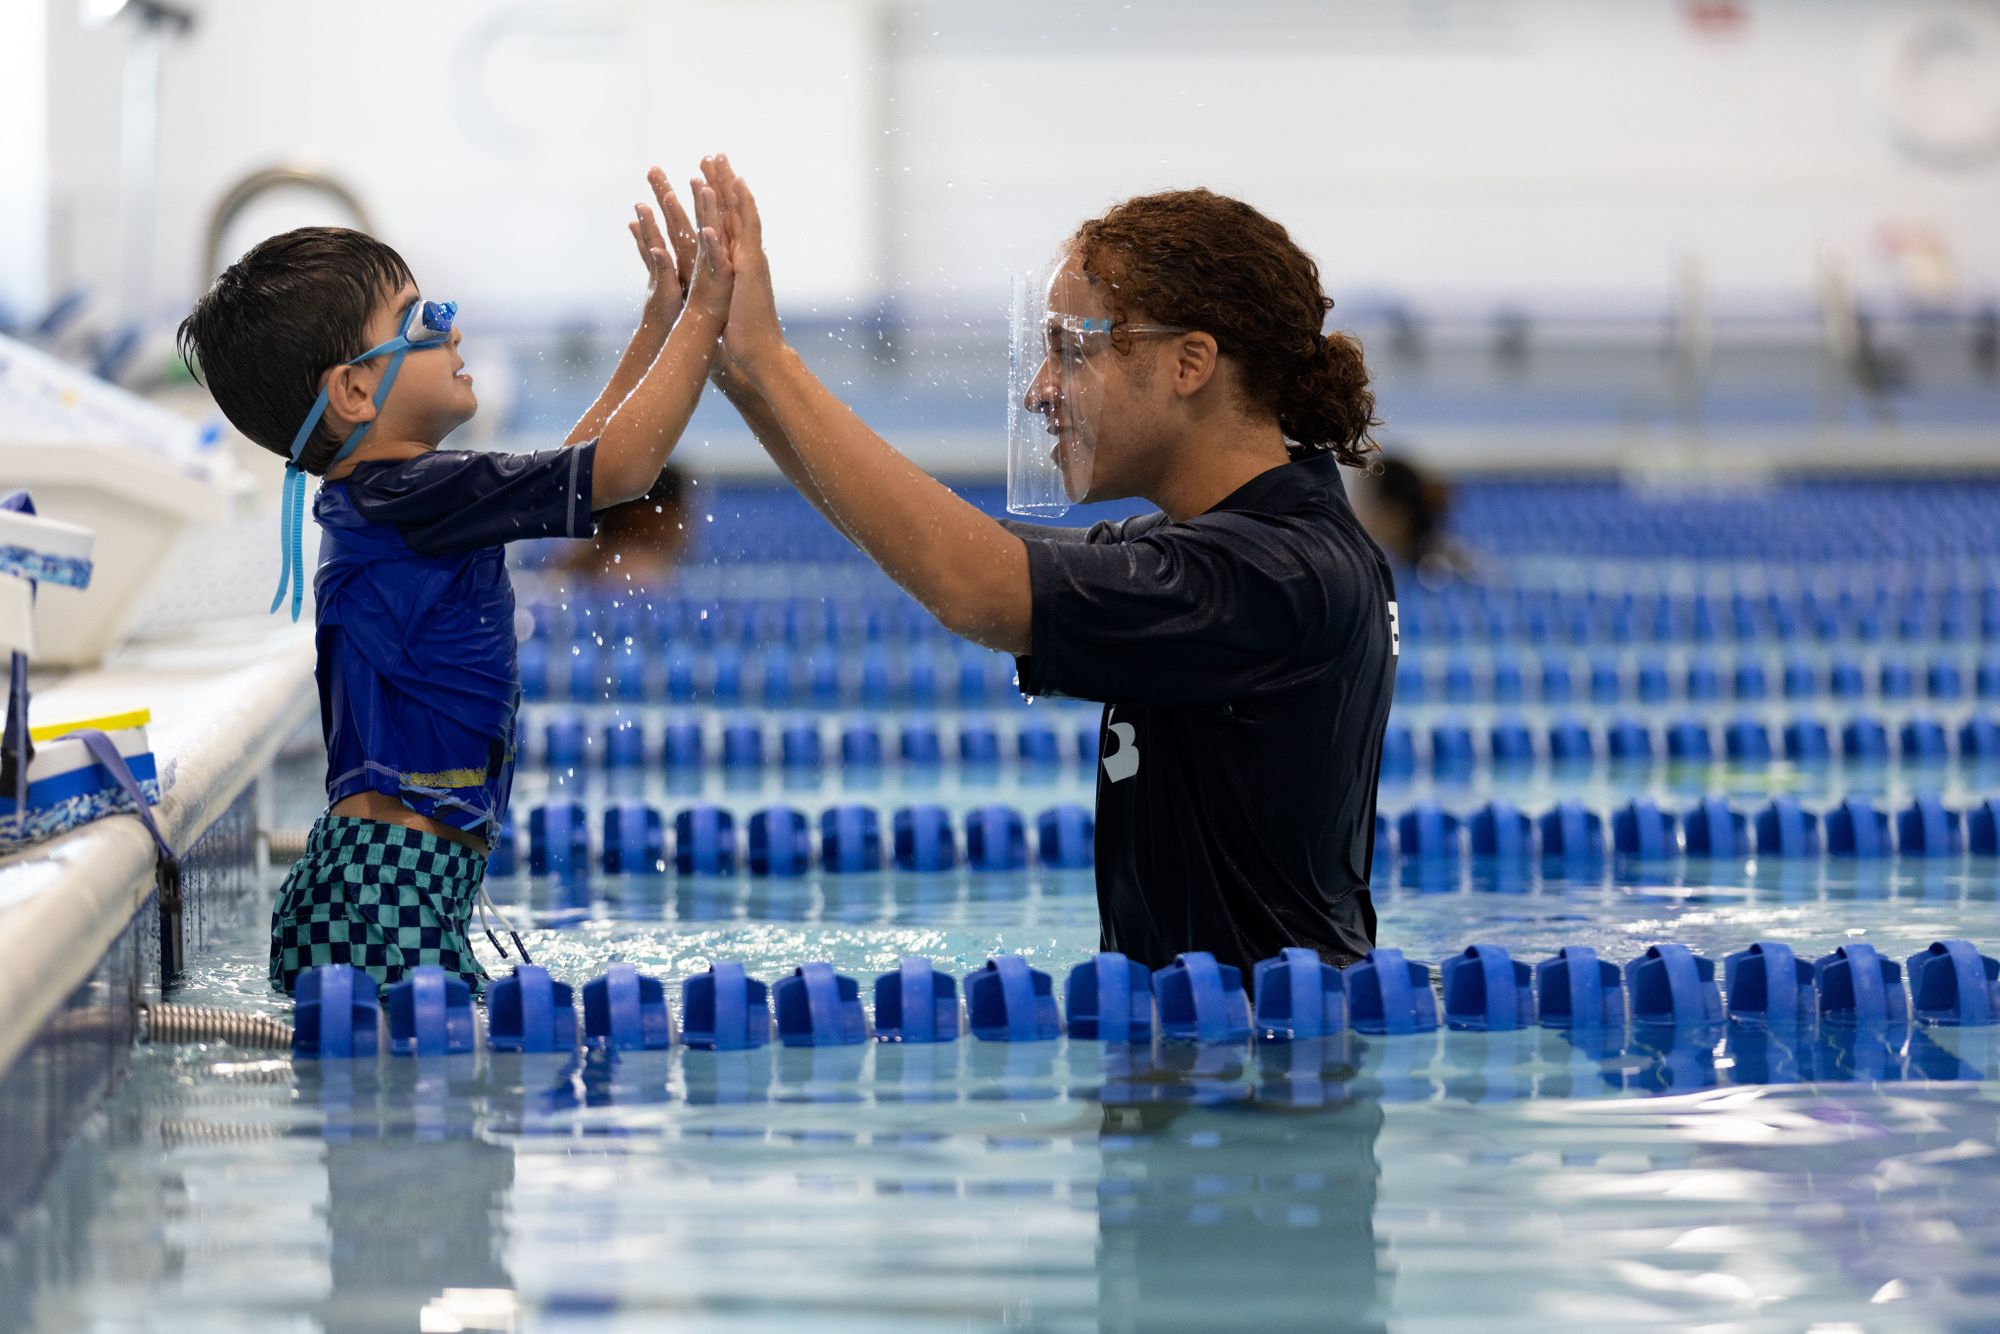 Proper swim gear and essentials are key to ensuring your child stays comfortable during their lesson!